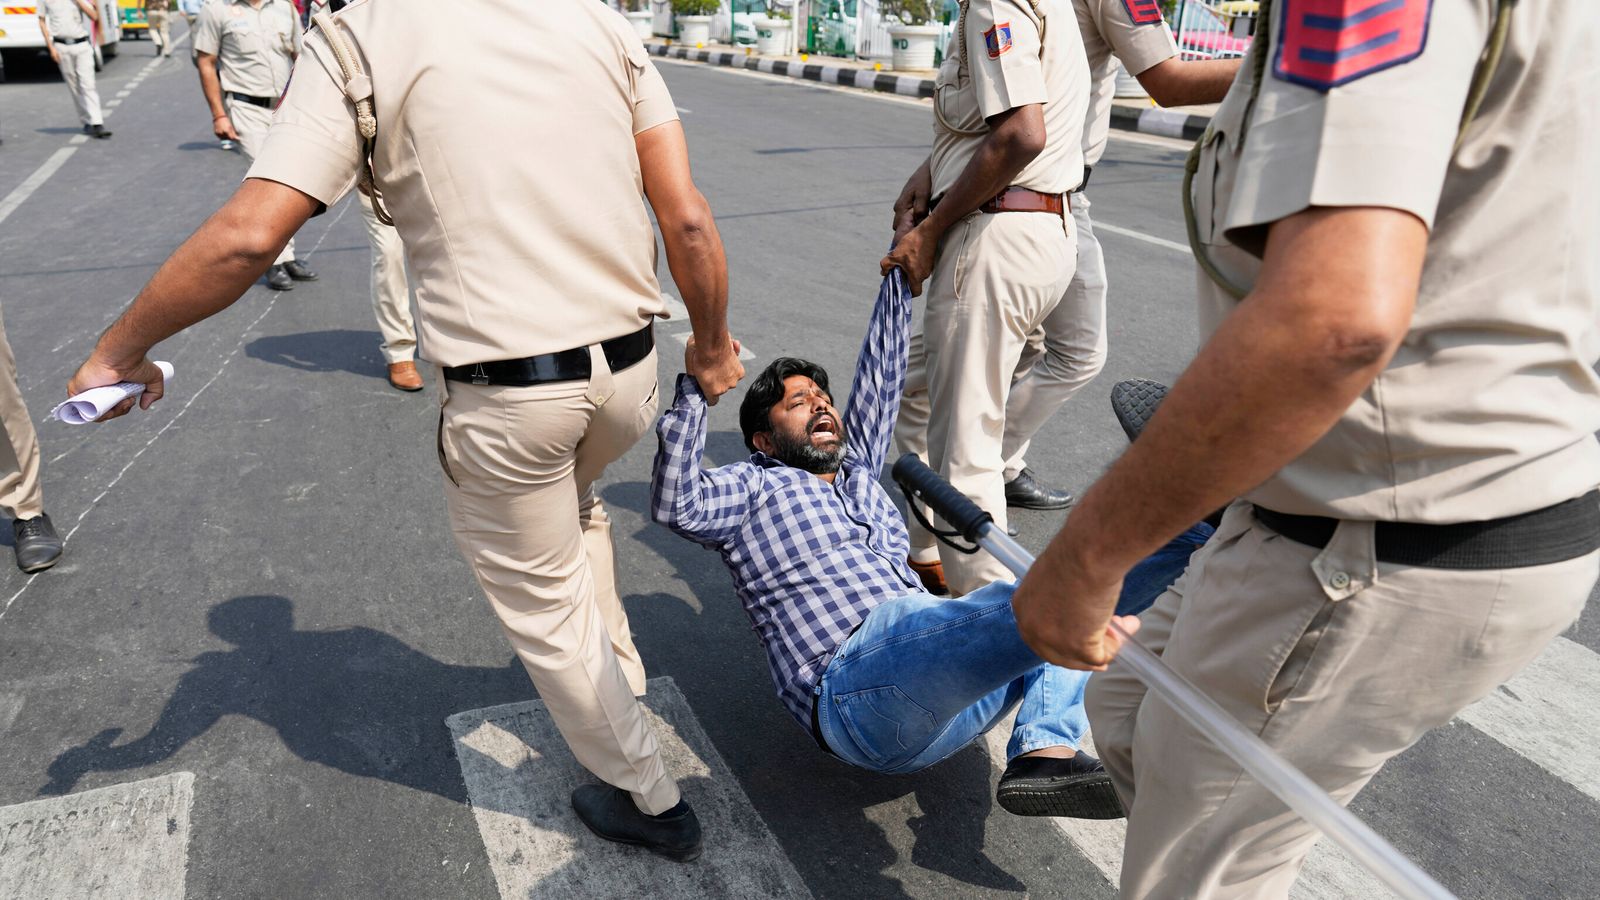 Arvind Kejriwal detained: India's PM Narendra Modi criticised as protests held over political rival's arrest